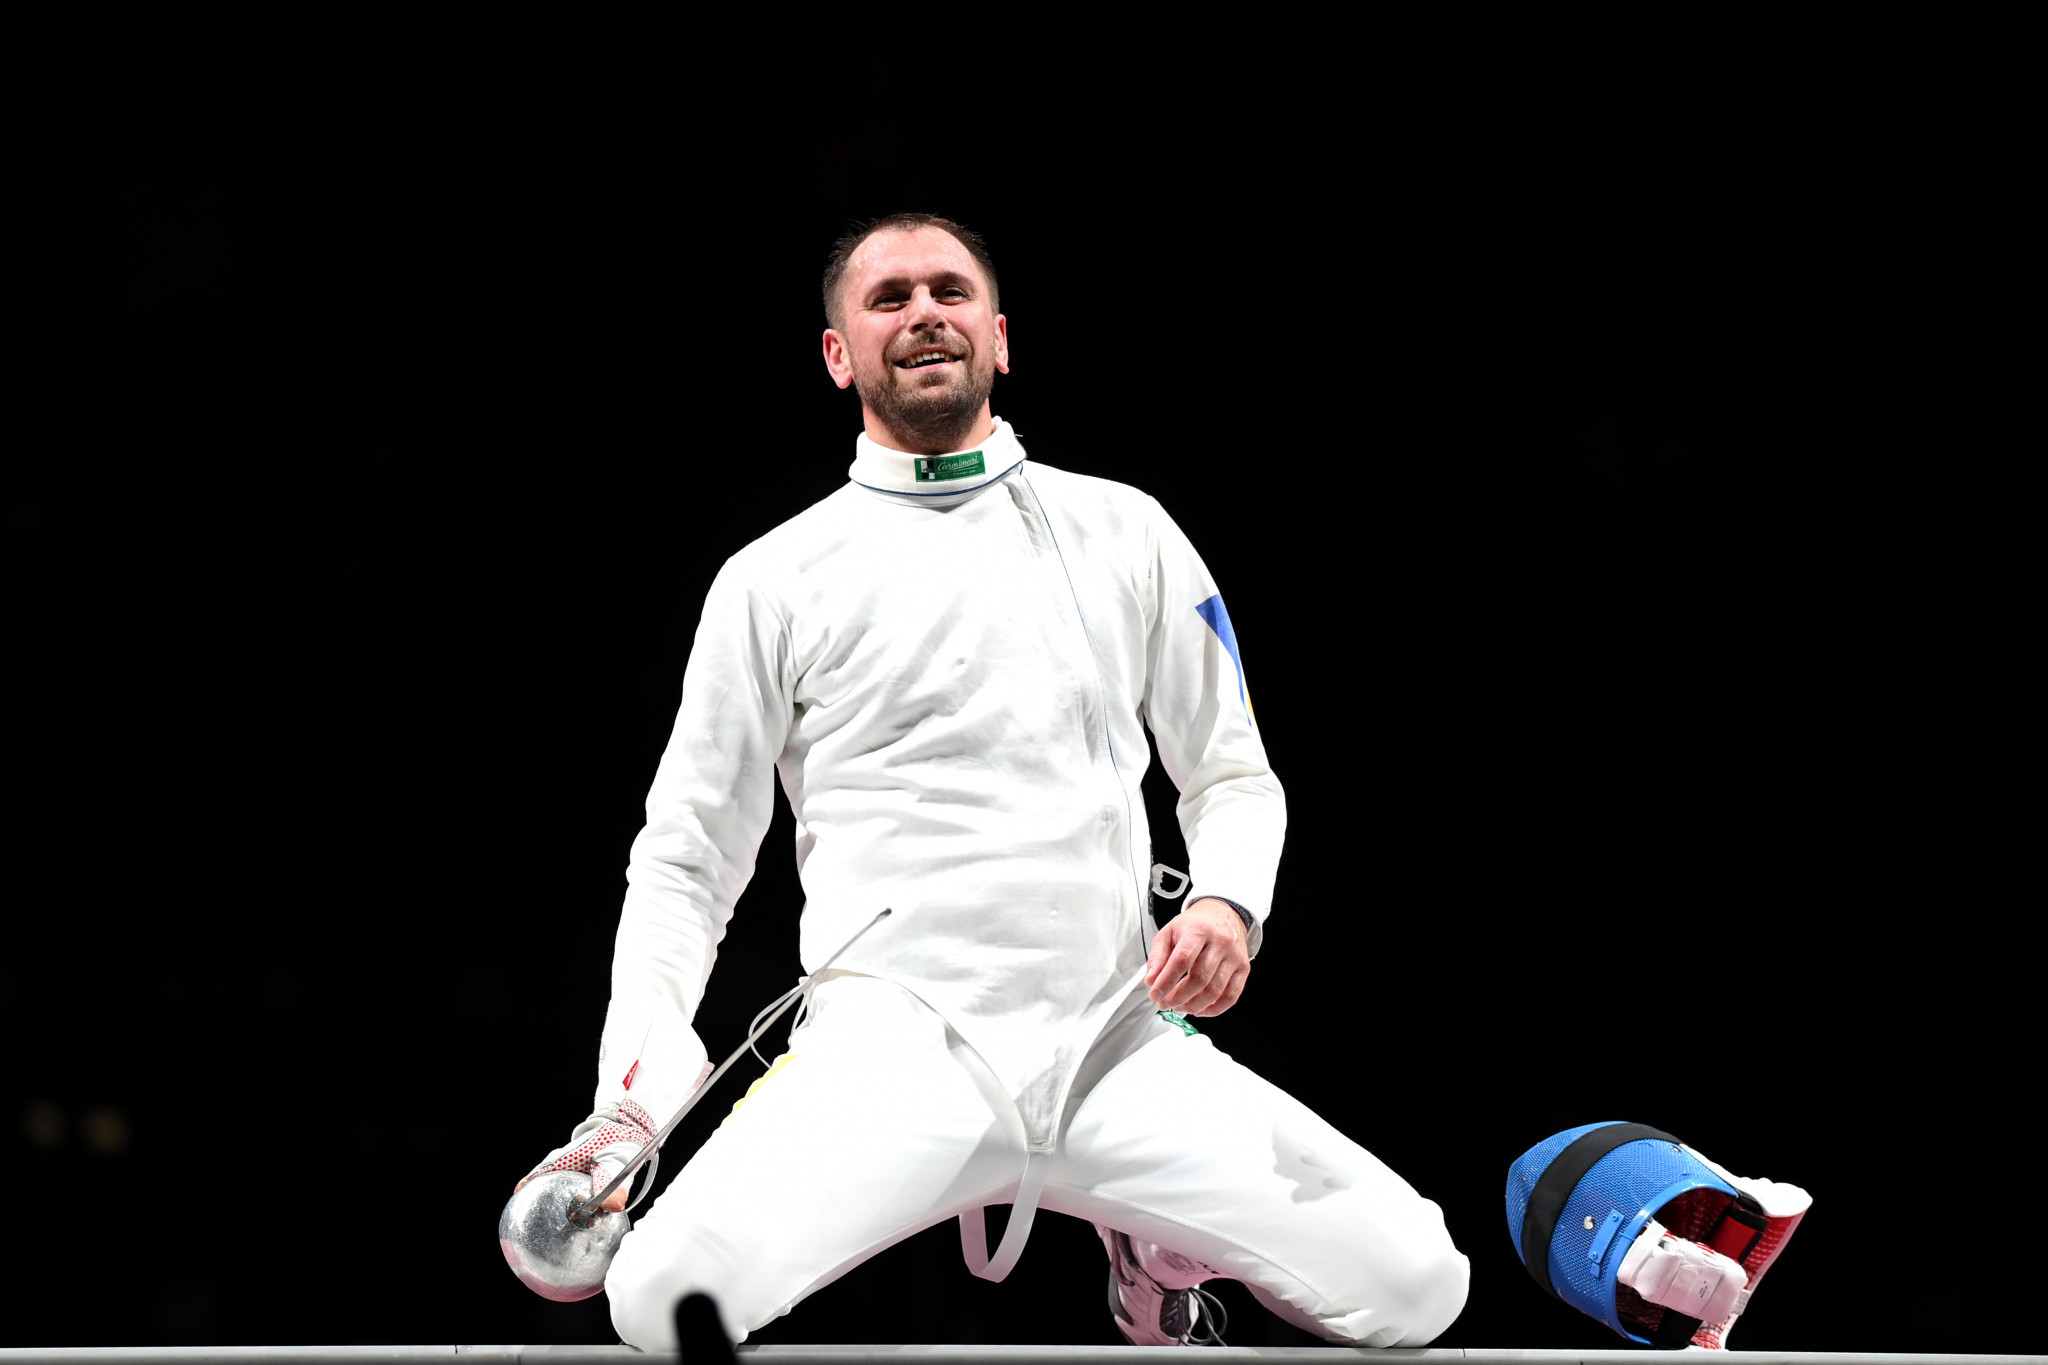 Ukrainian withdraws from bout against Russian at Fencing World Championships